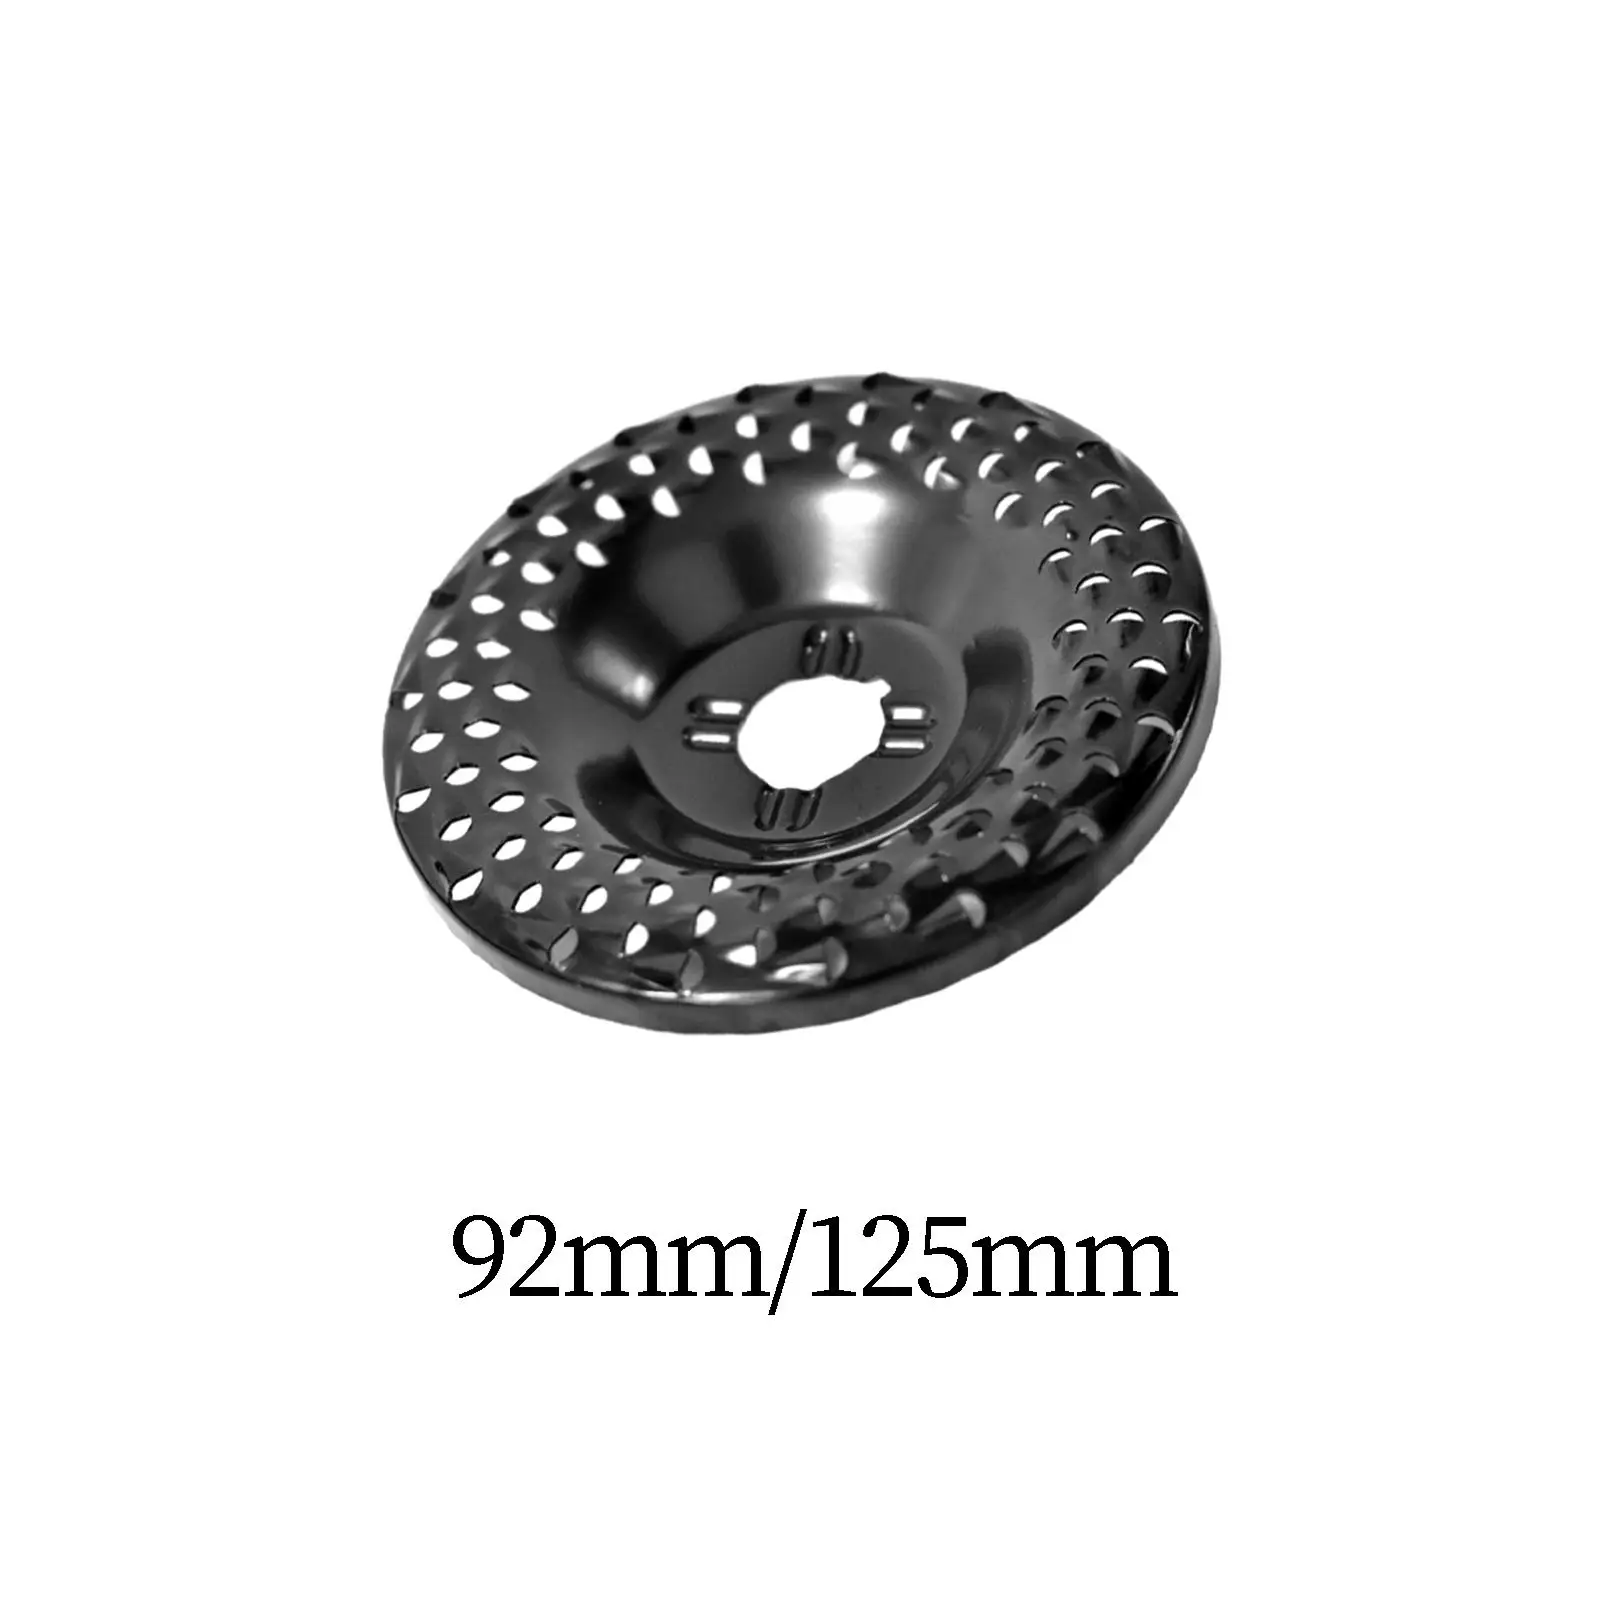 Grinder Wheel Disc Attachments Woodworking Tool Steel 92mm/125mm Spare Parts Sturdy Wood Cutting Angle Grinder Carving Disc